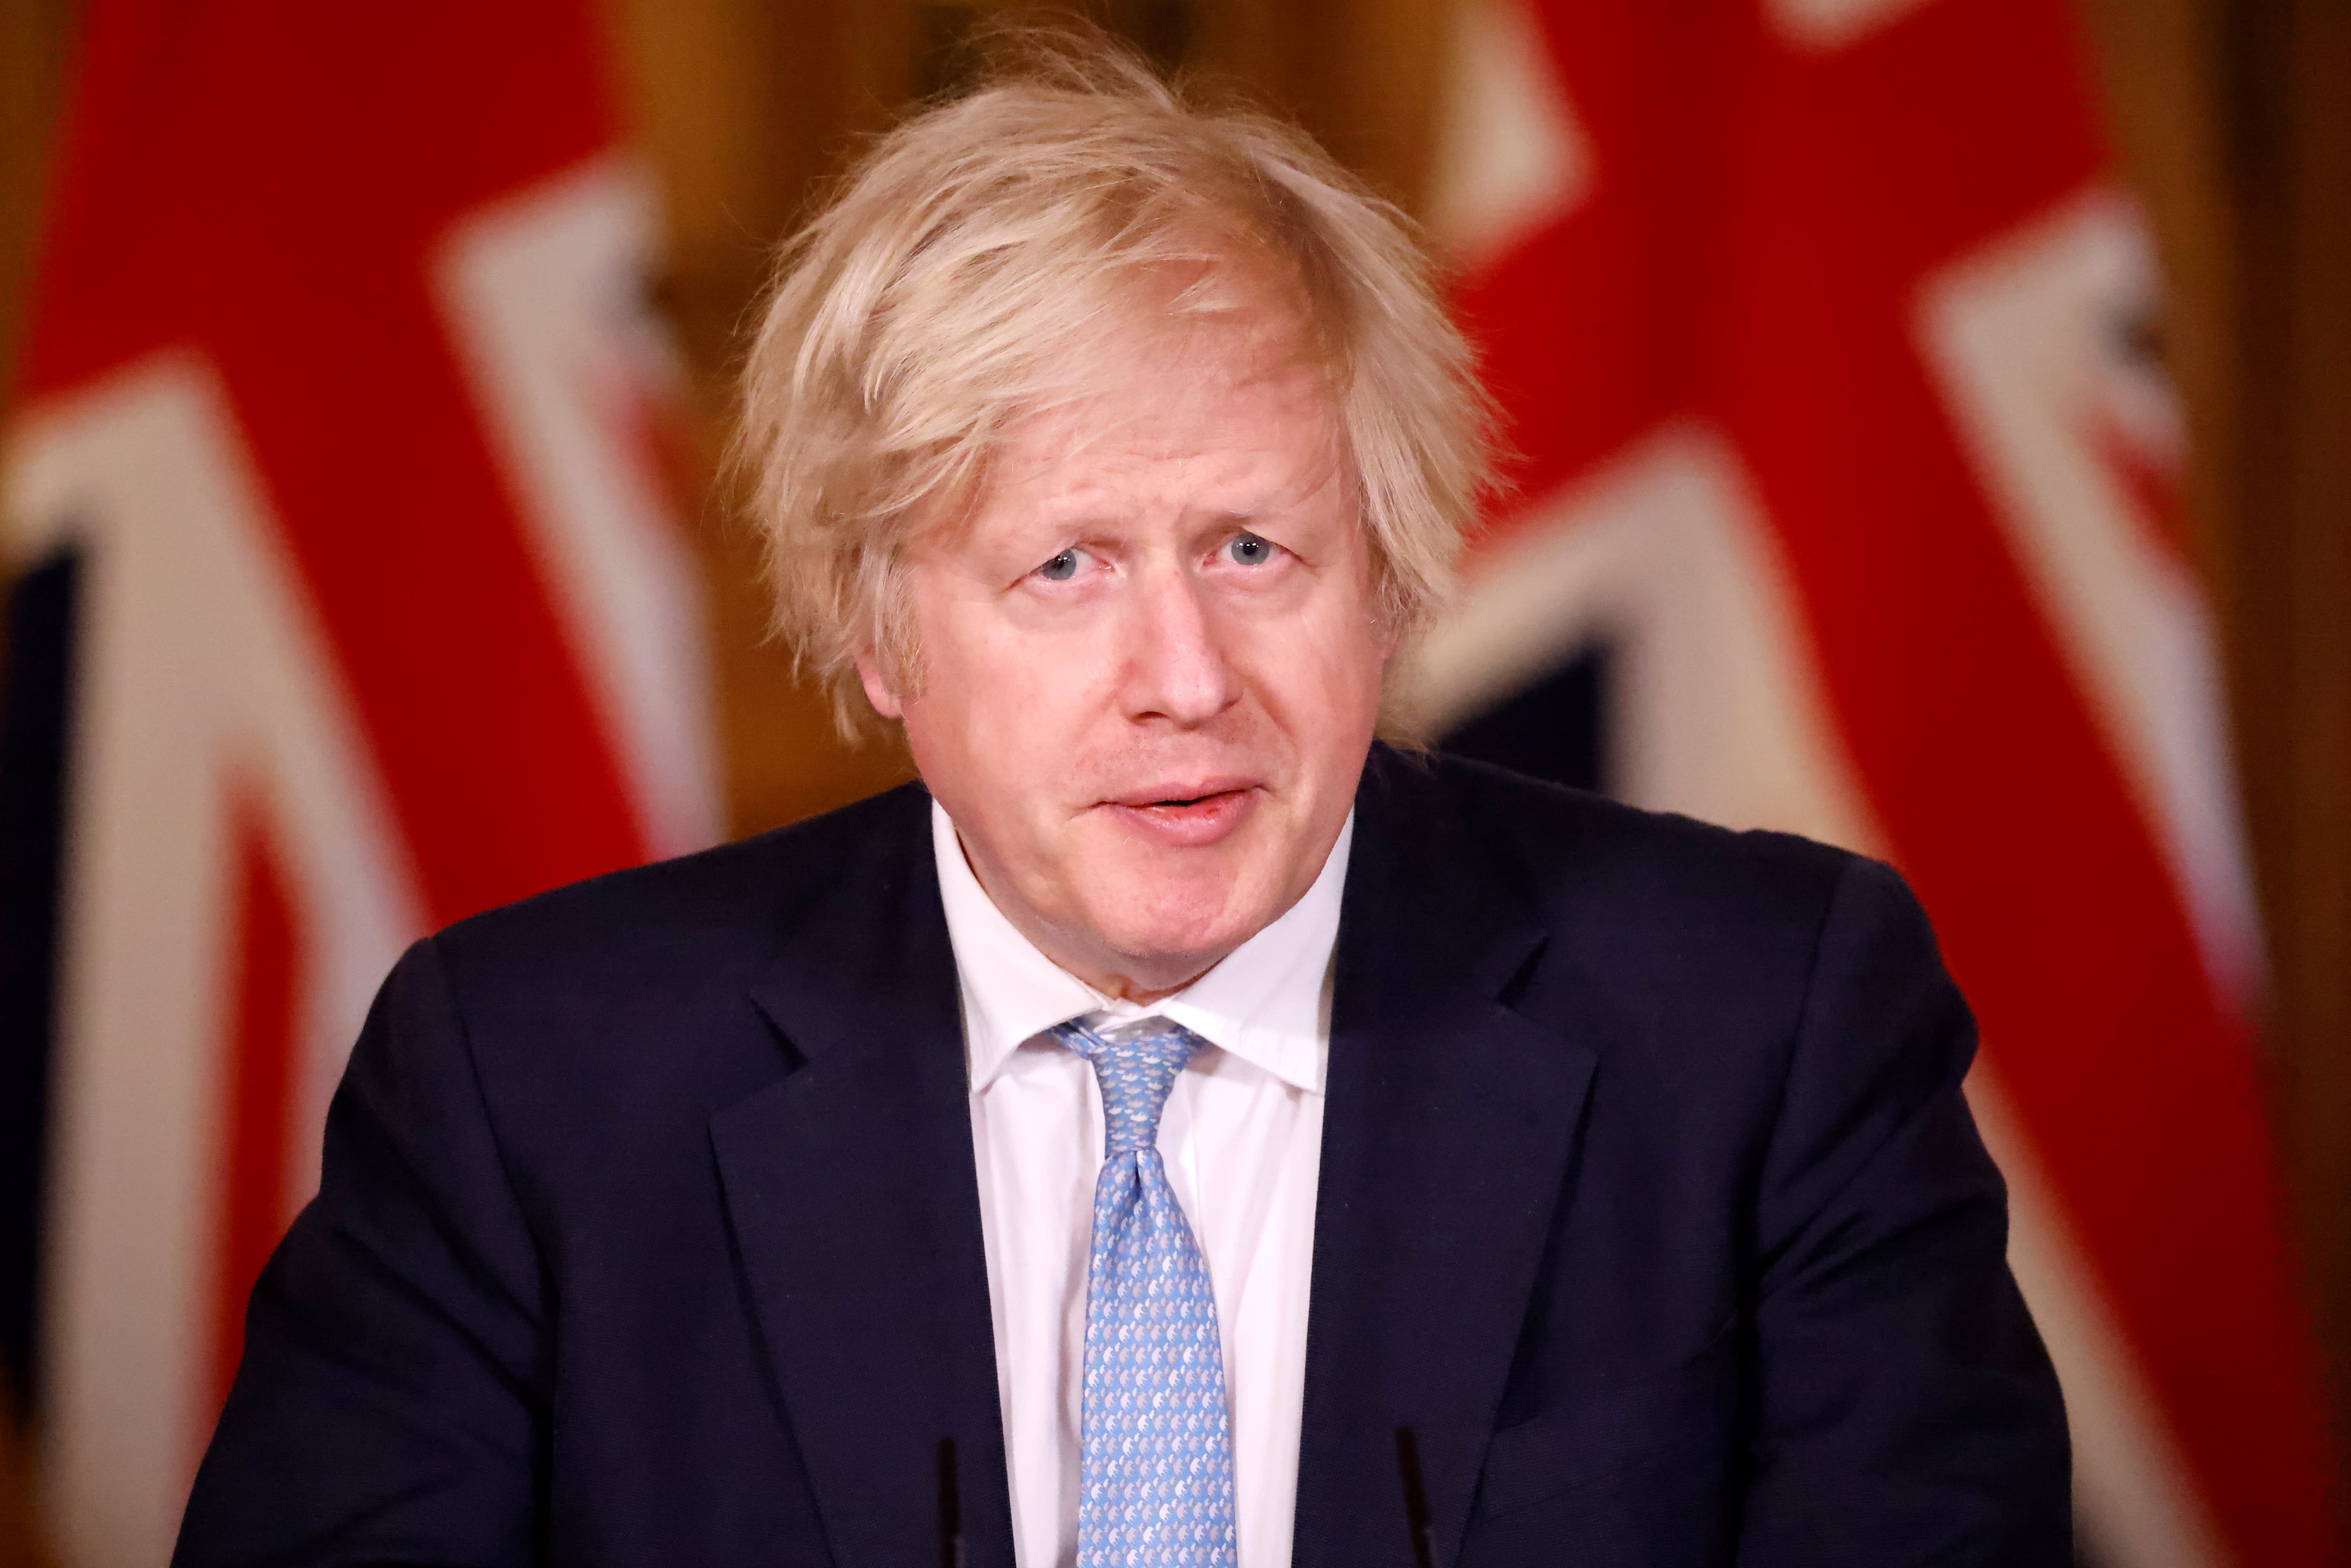 The British Boris Johnson urges others to receive the Covid vaccine